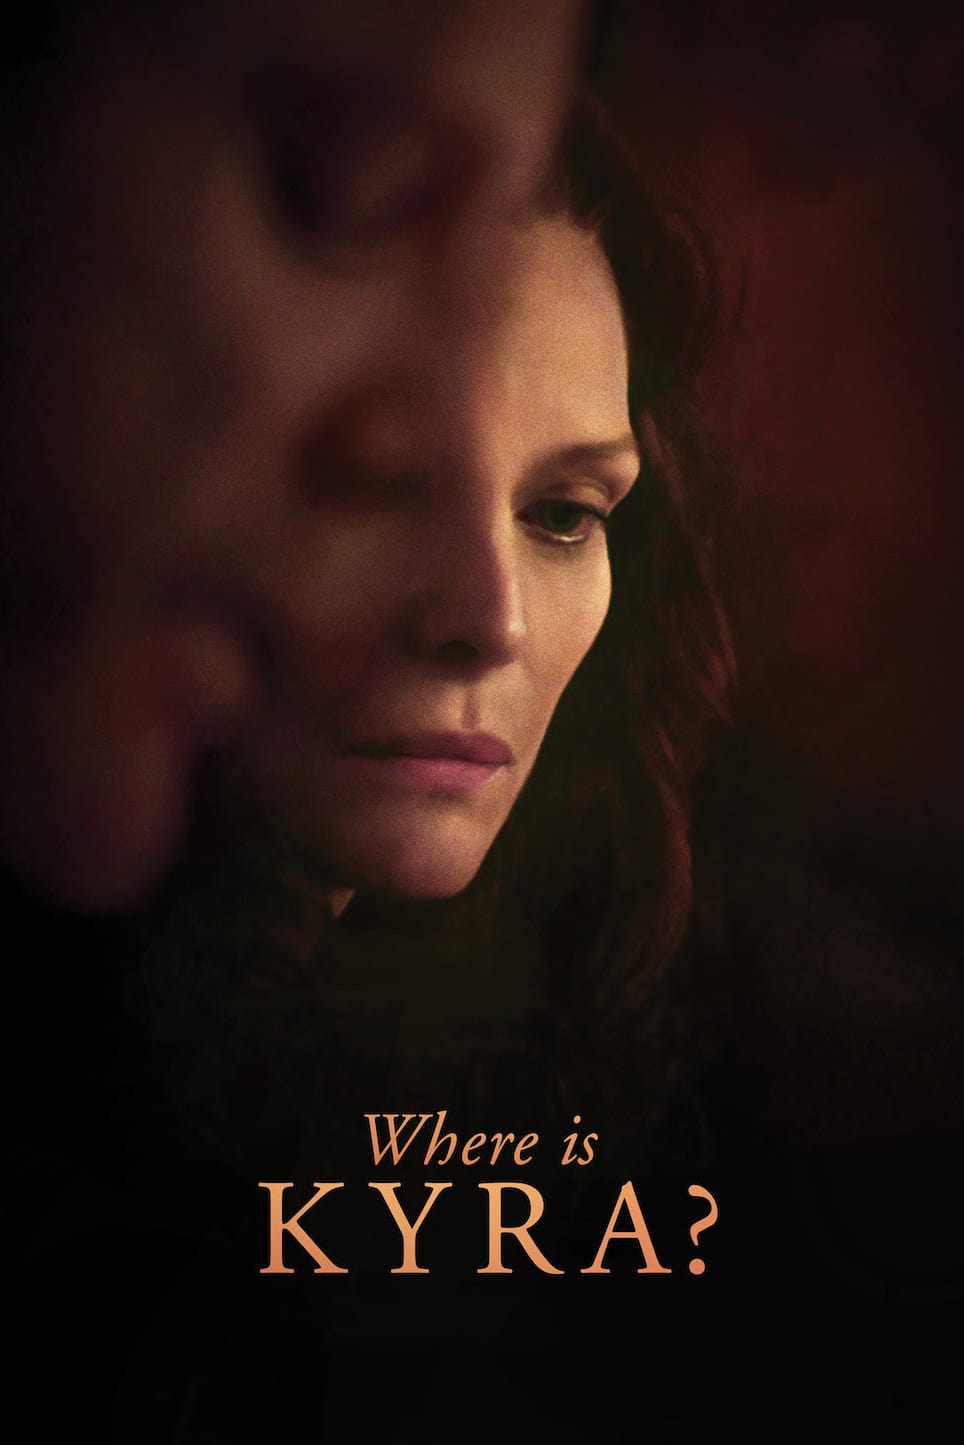 Poster for the movie "Where Is Kyra?"